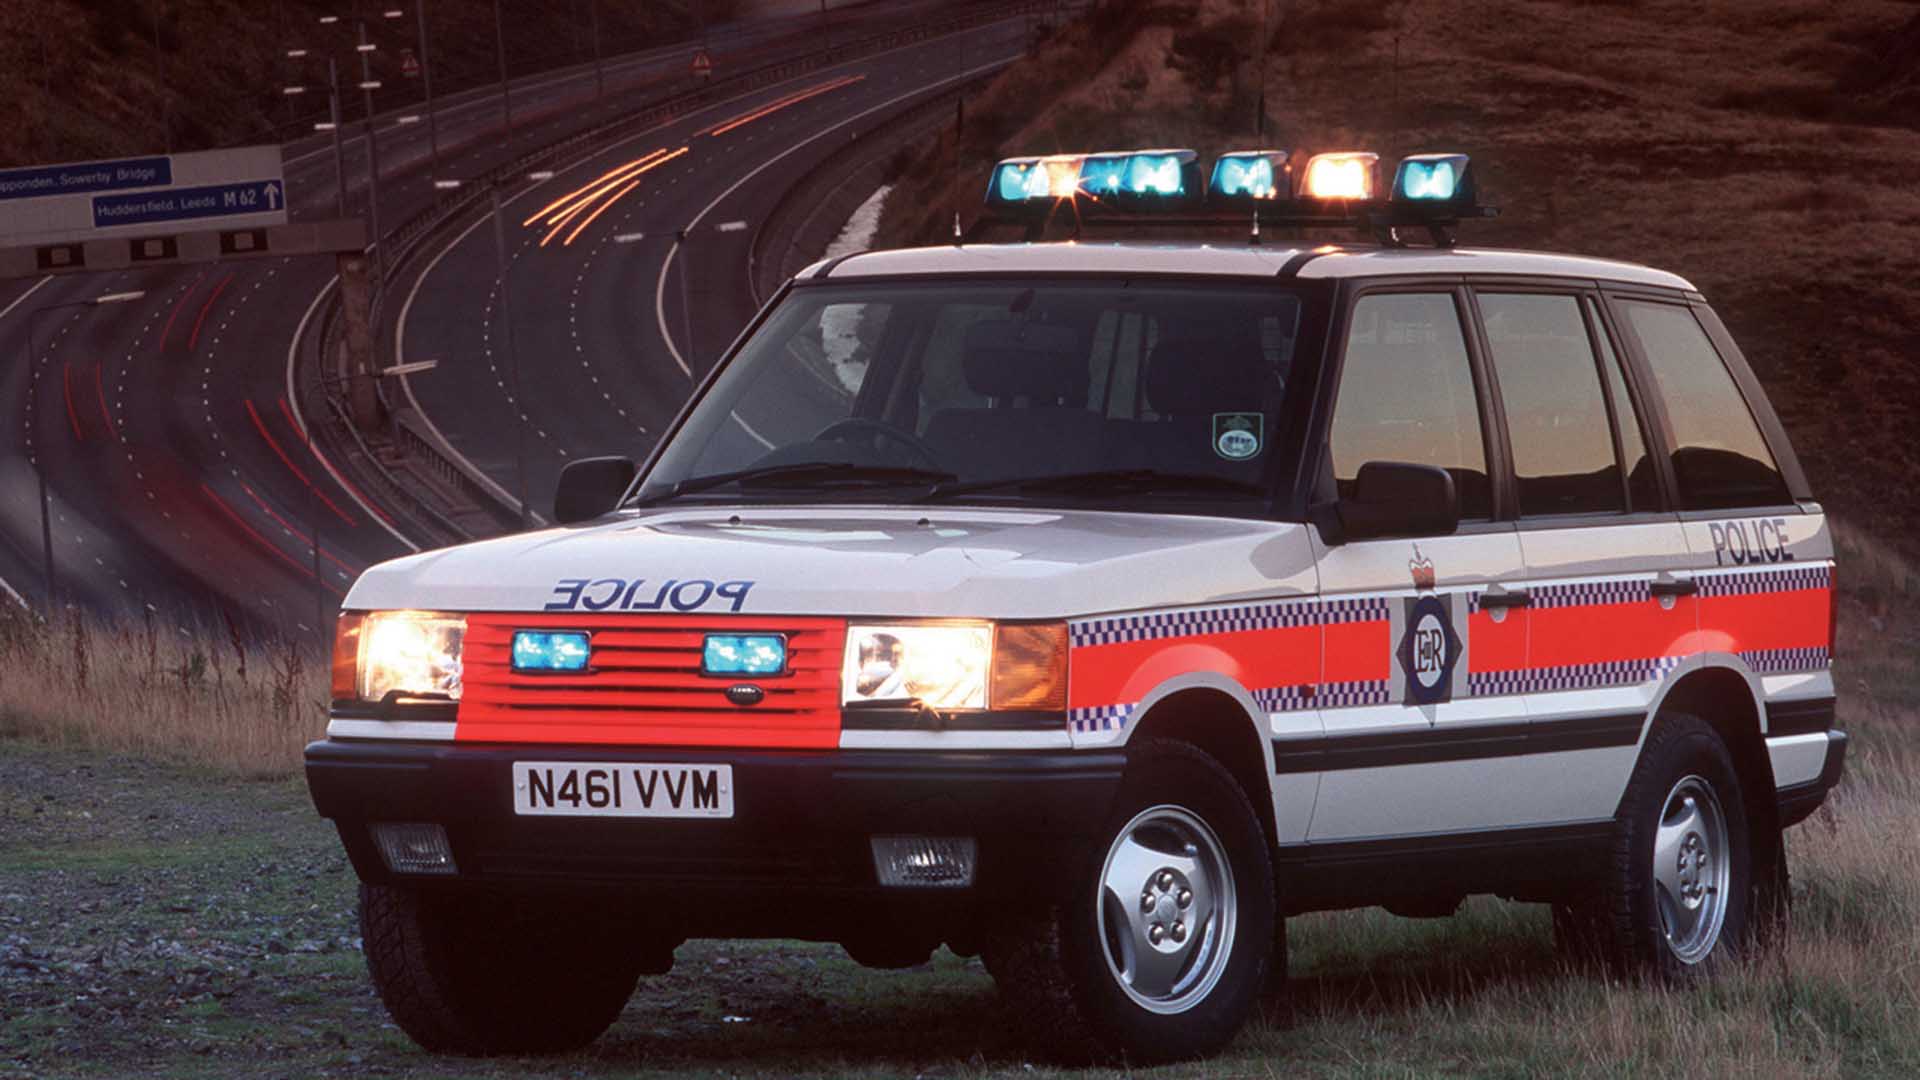 Greater-Manchester-Police-Range-Rover-P38A.jpg